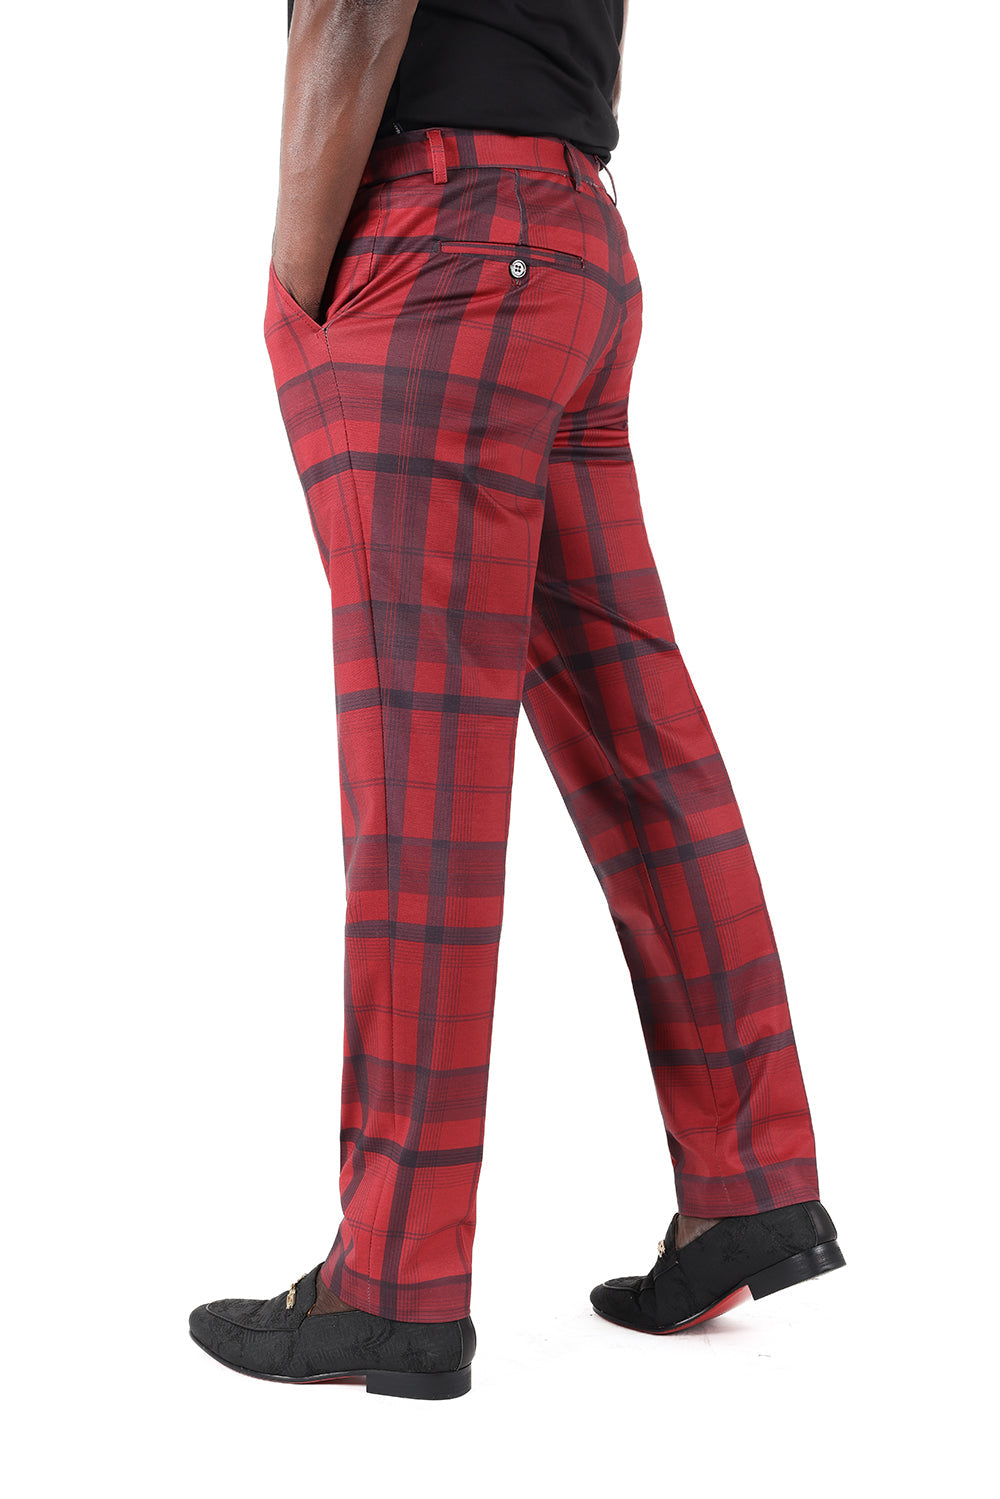 Barabas Men's Printed Checkered Design Red Sky Blue Chino Pants CP182 Red